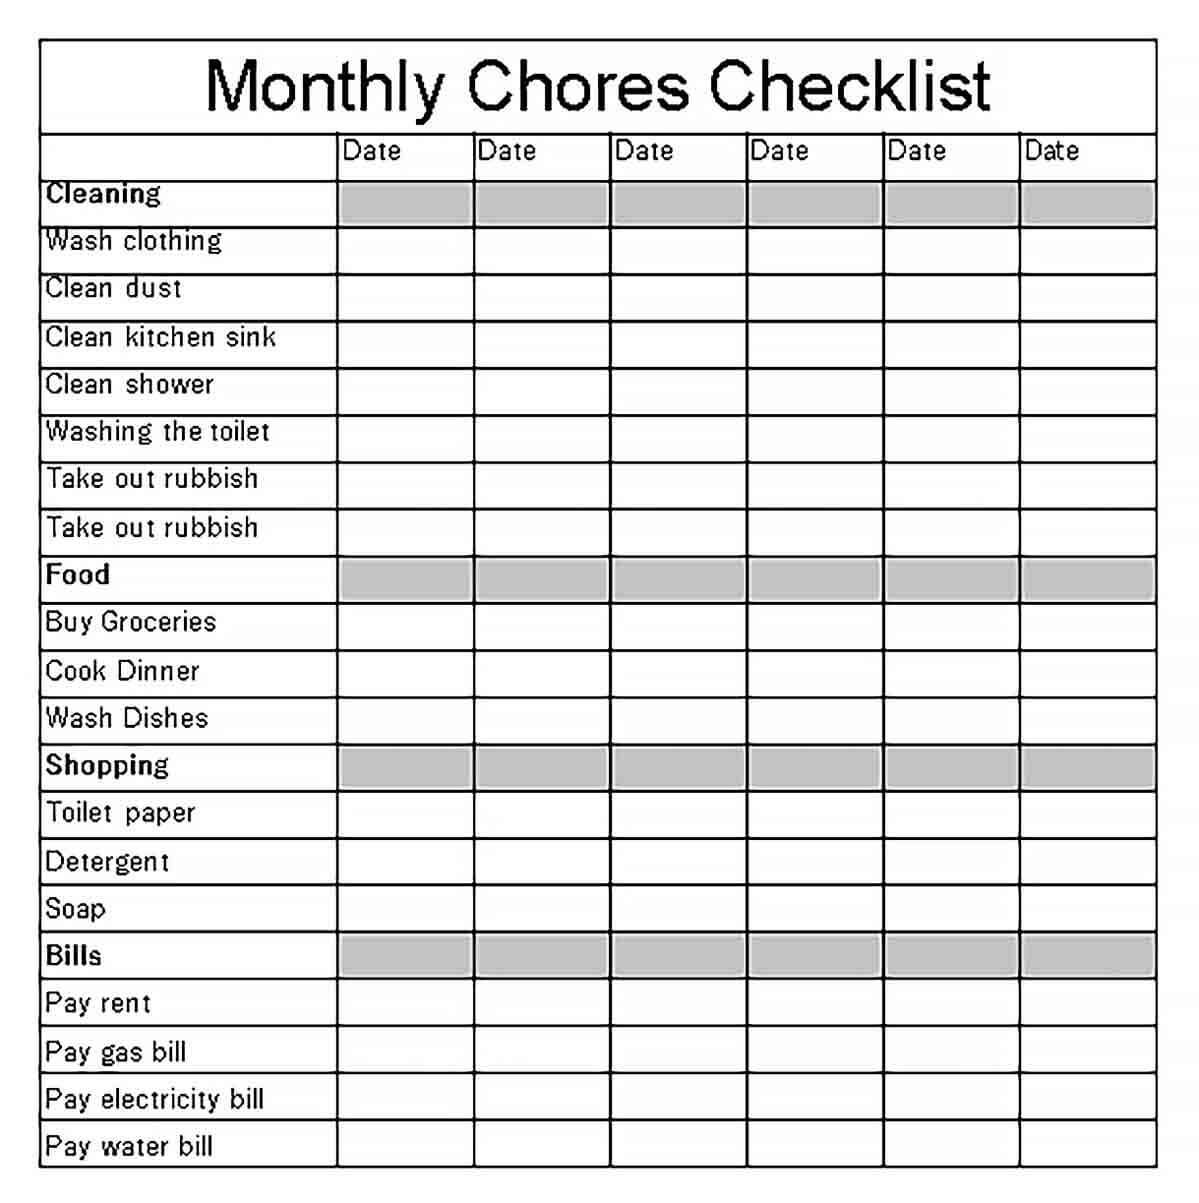 Sample Monthly Chore Checklist Template